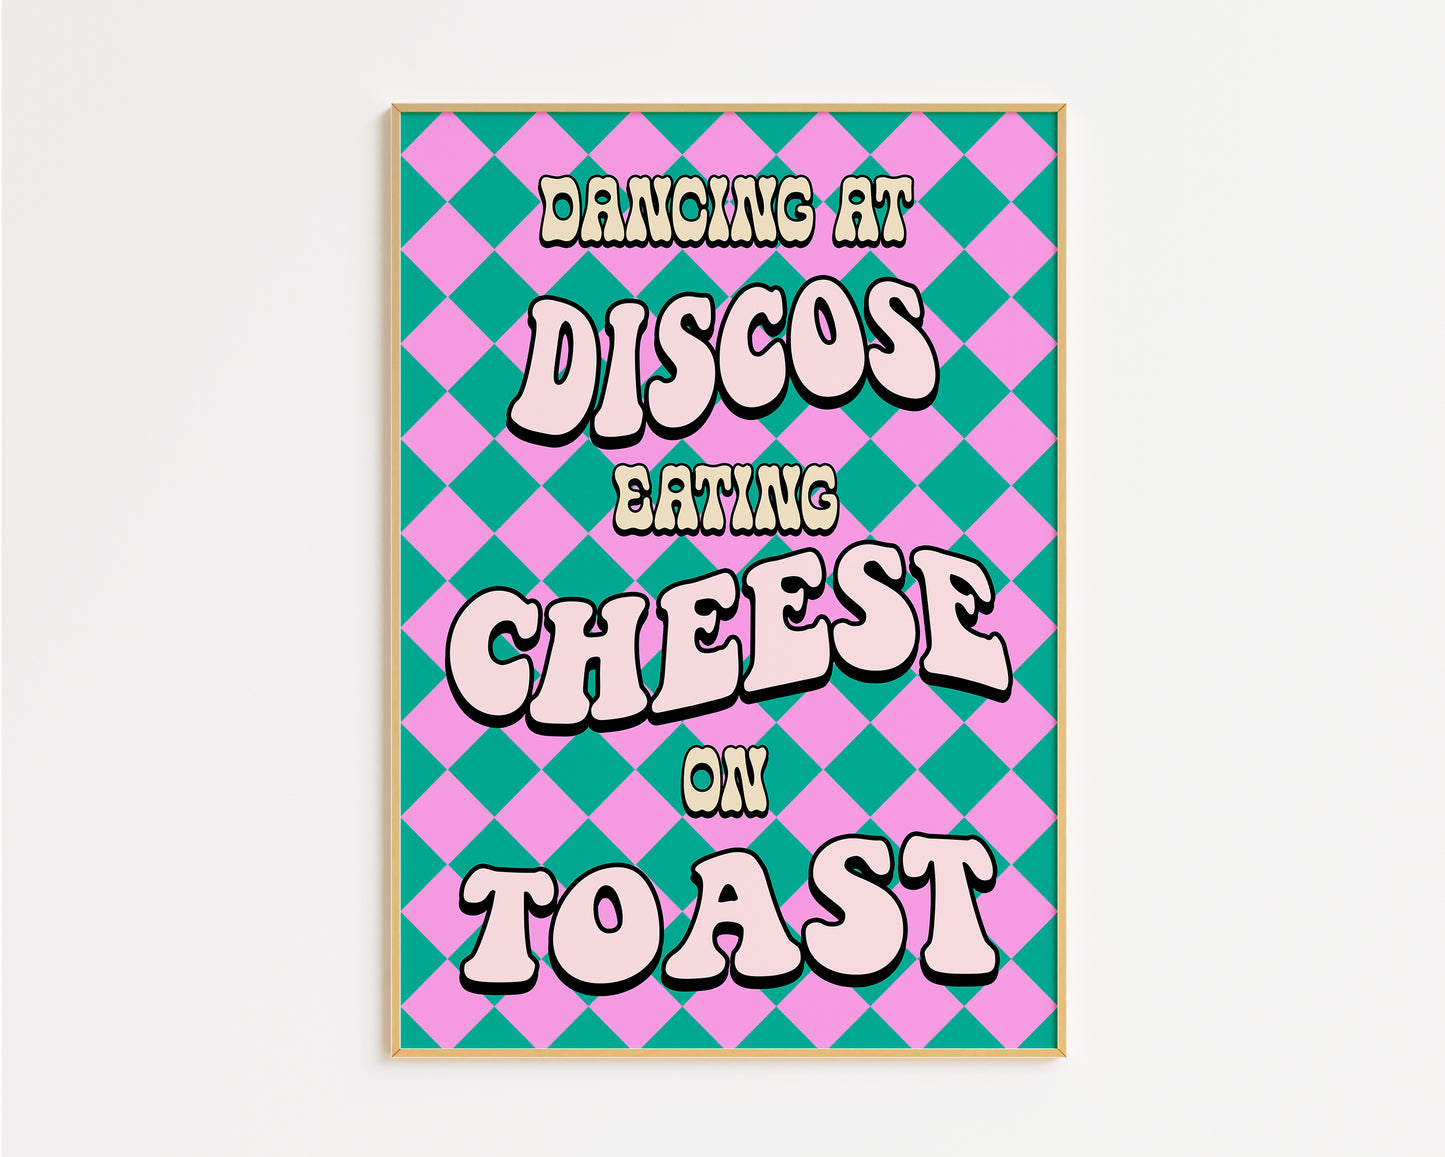 Dancing At Discos Eating Cheese On Toast Print